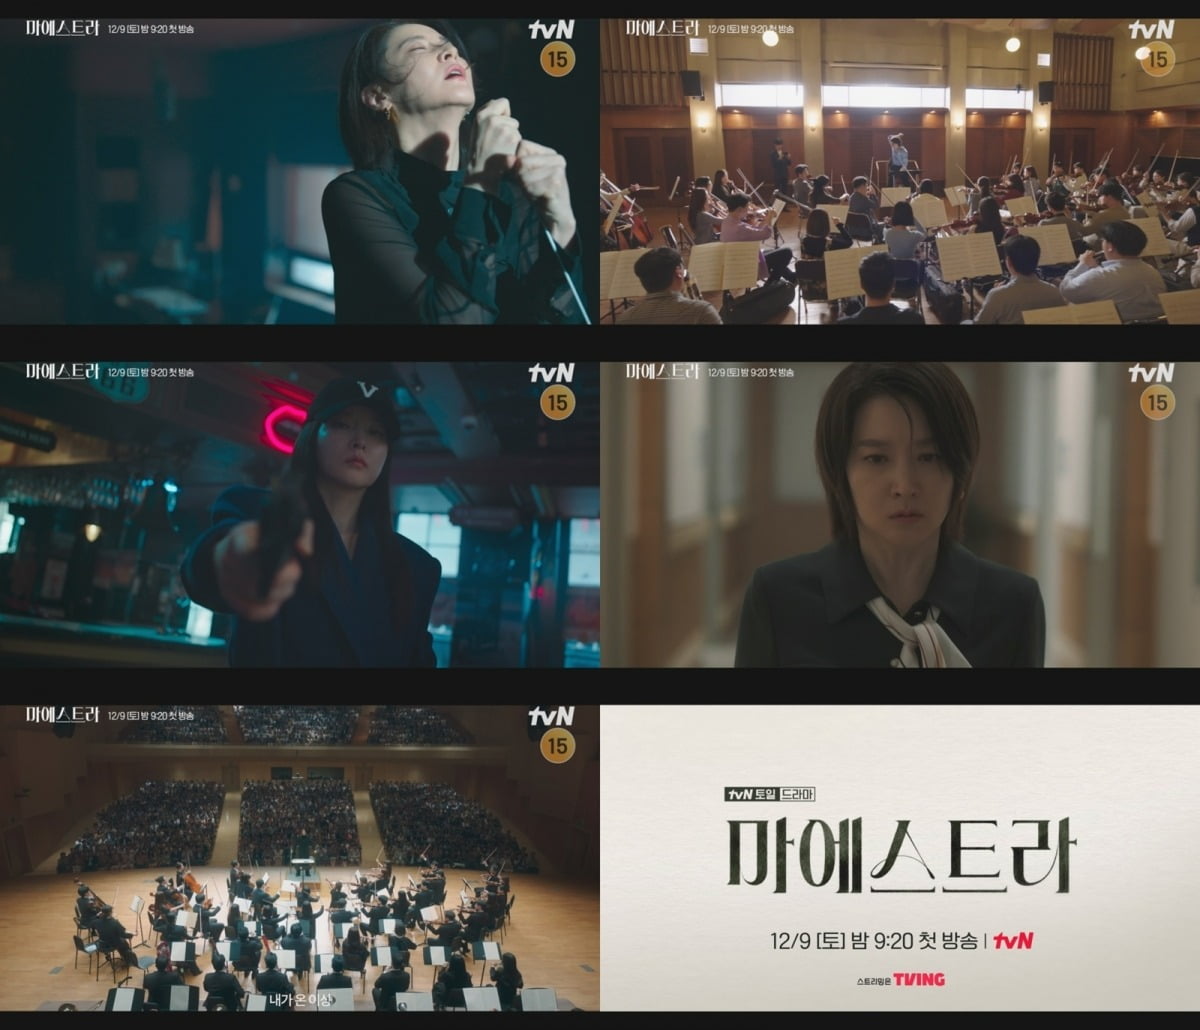 Lee Young-ae transforms into a fierce maestra